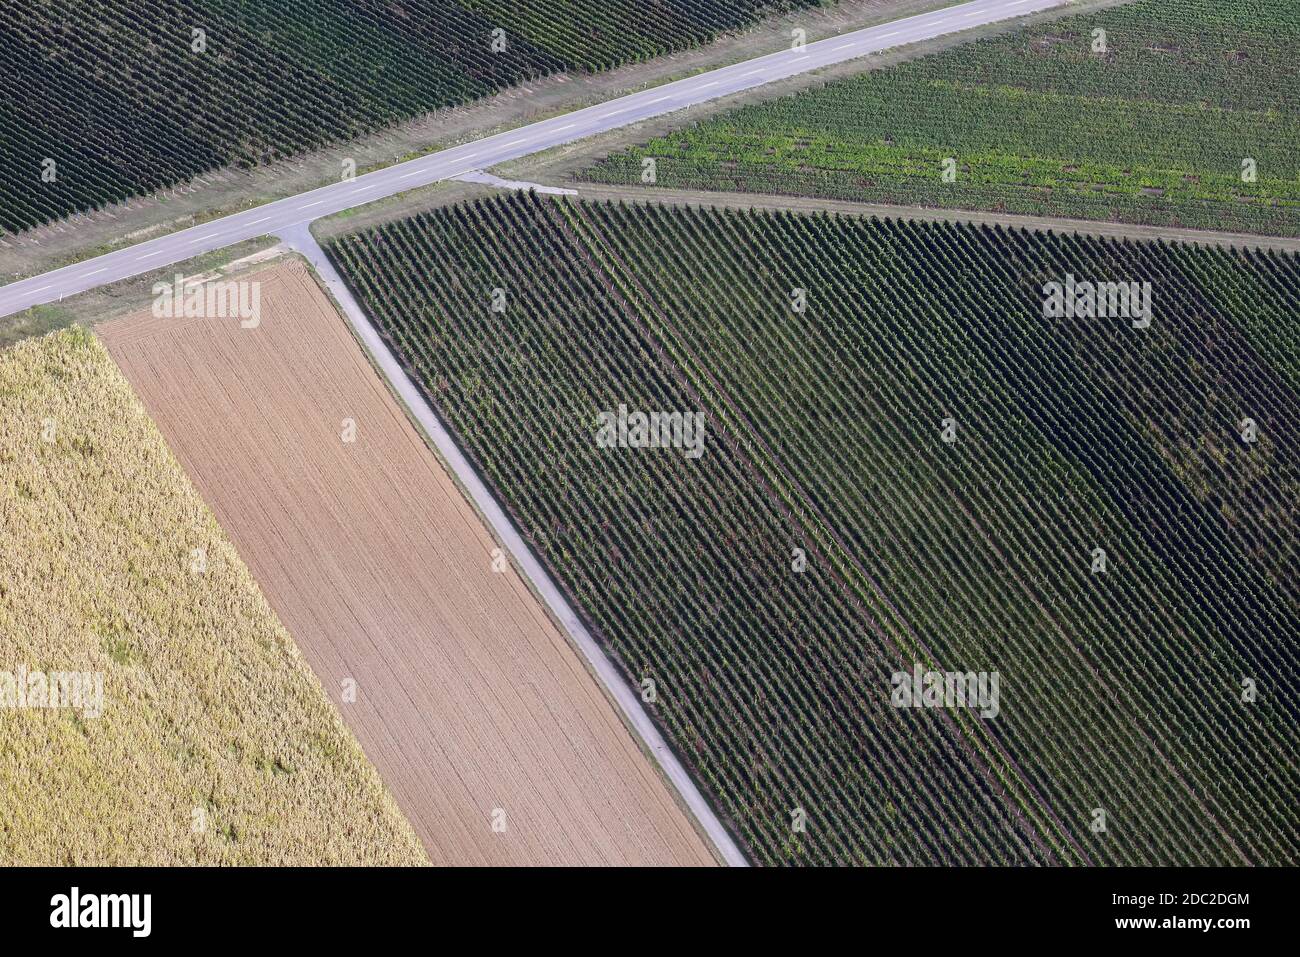 A bird's eye view of cultural landscape Stock Photo